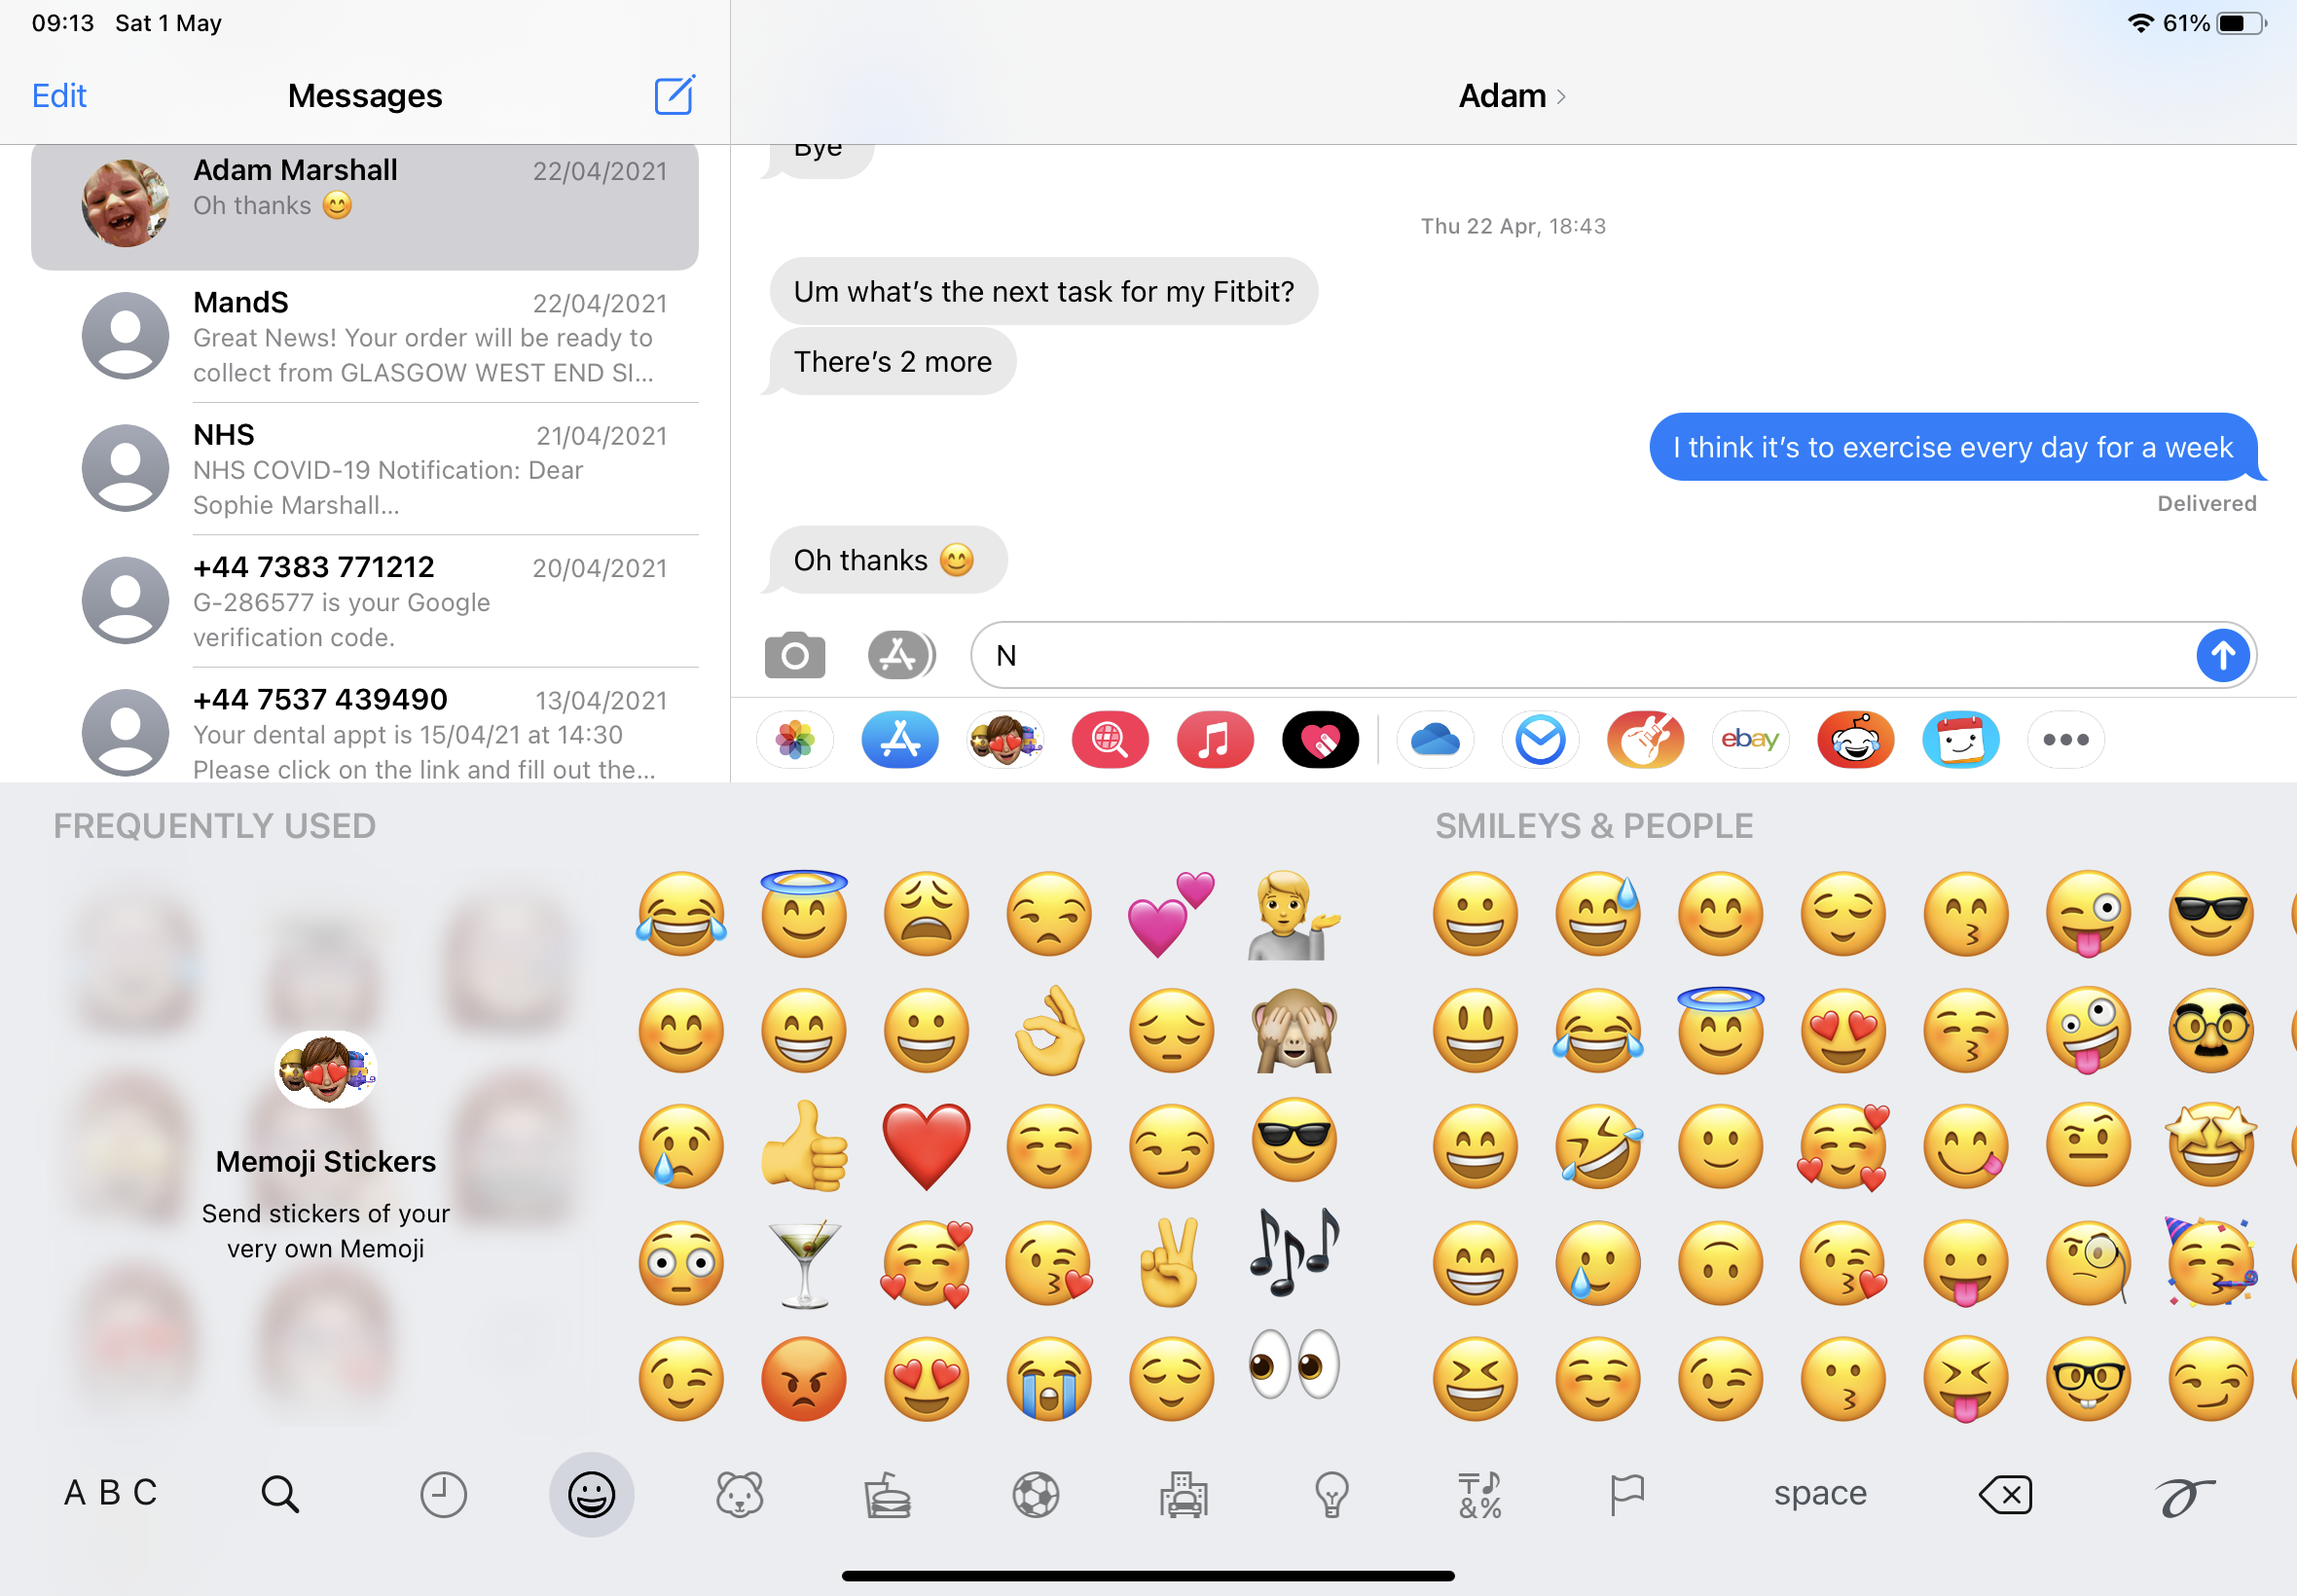 Messages with emojis